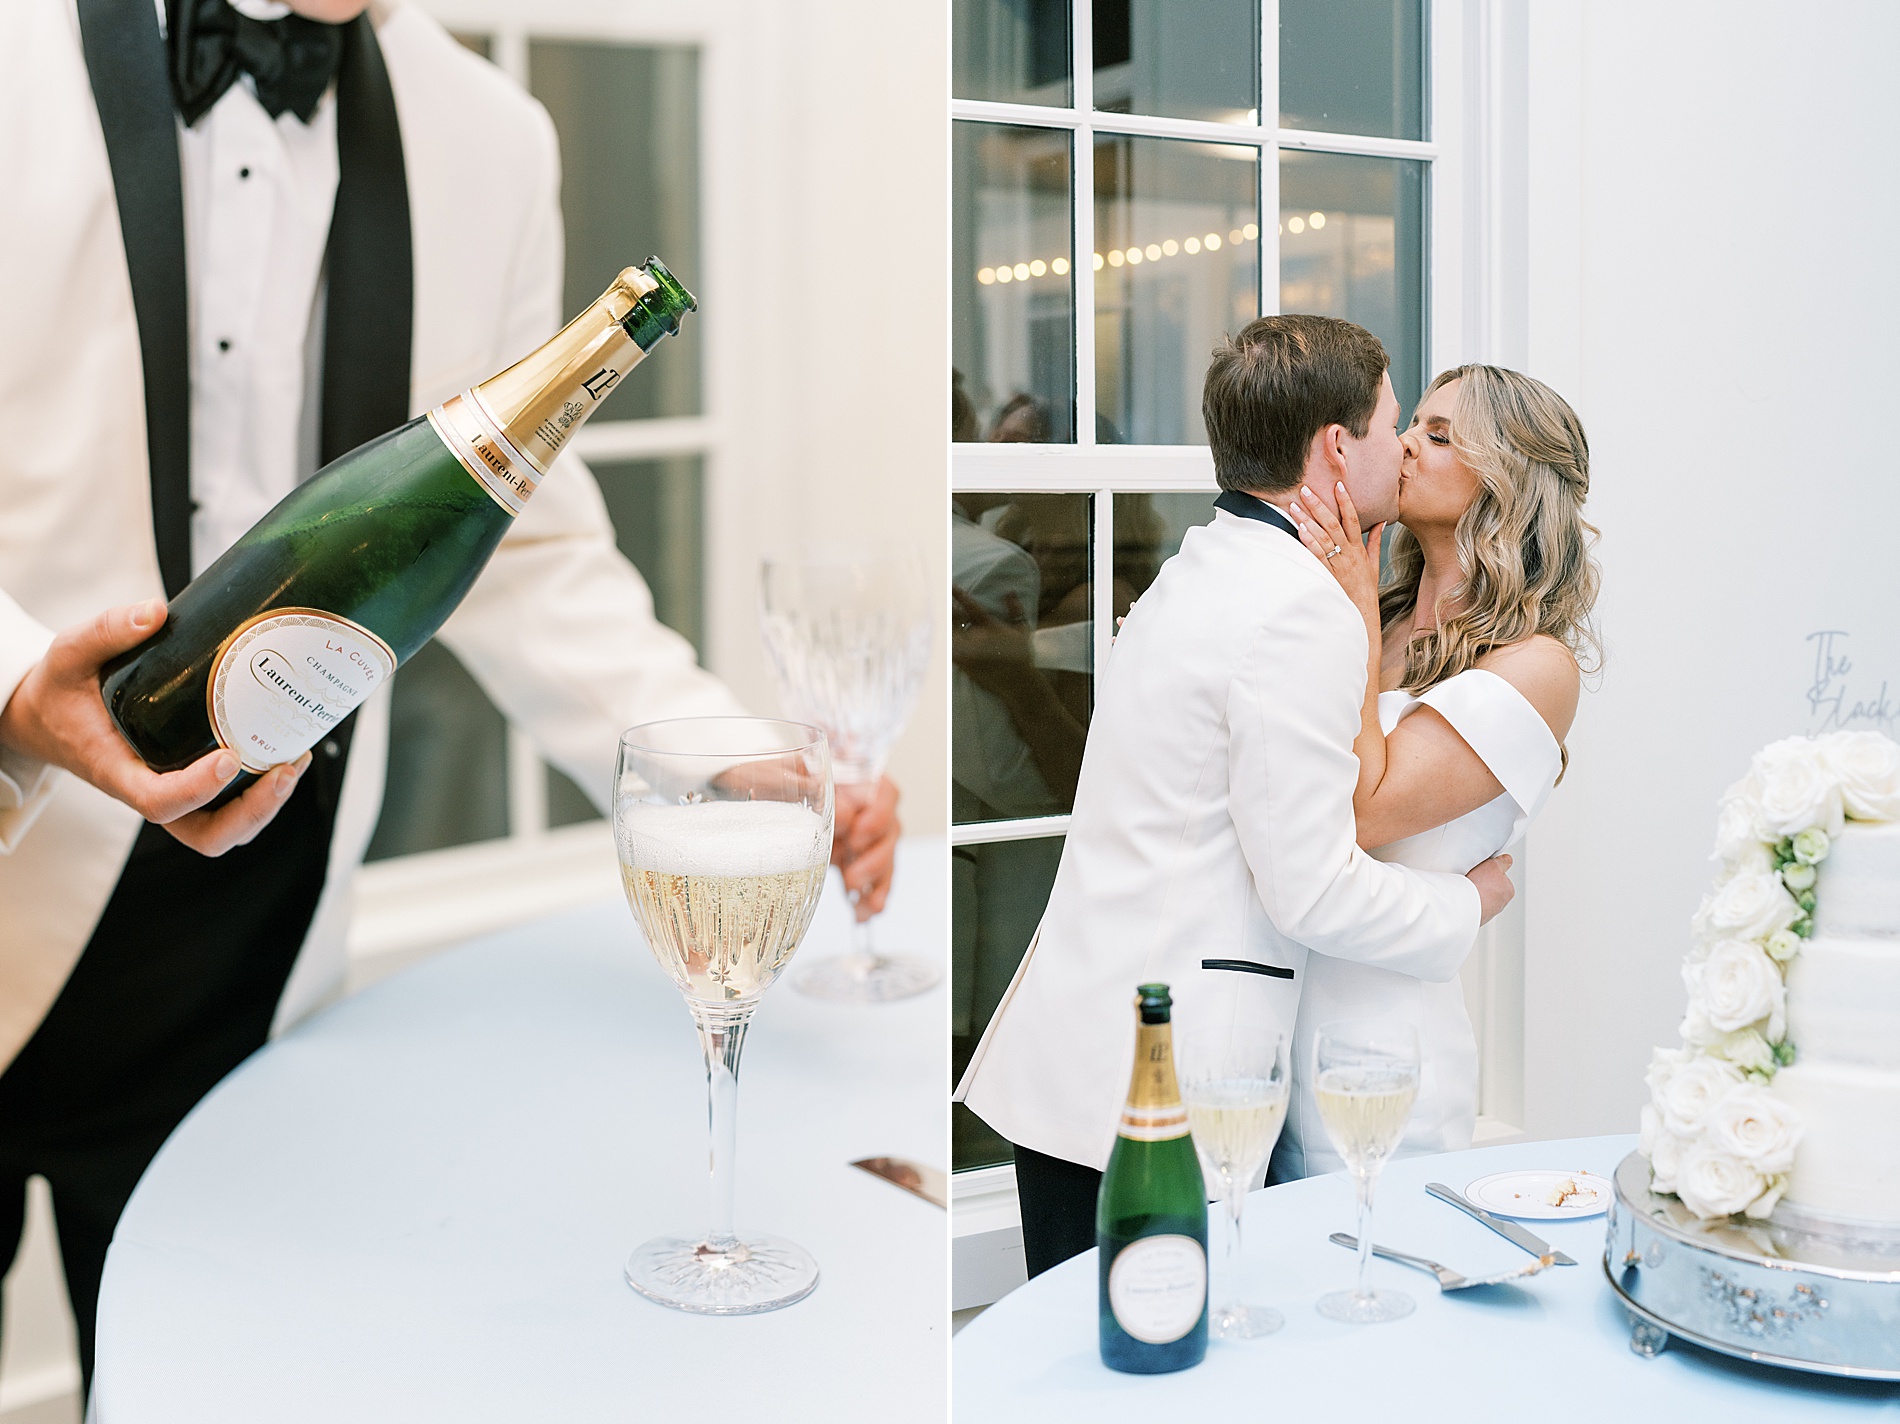 newlyweds share champagne during cake cutting